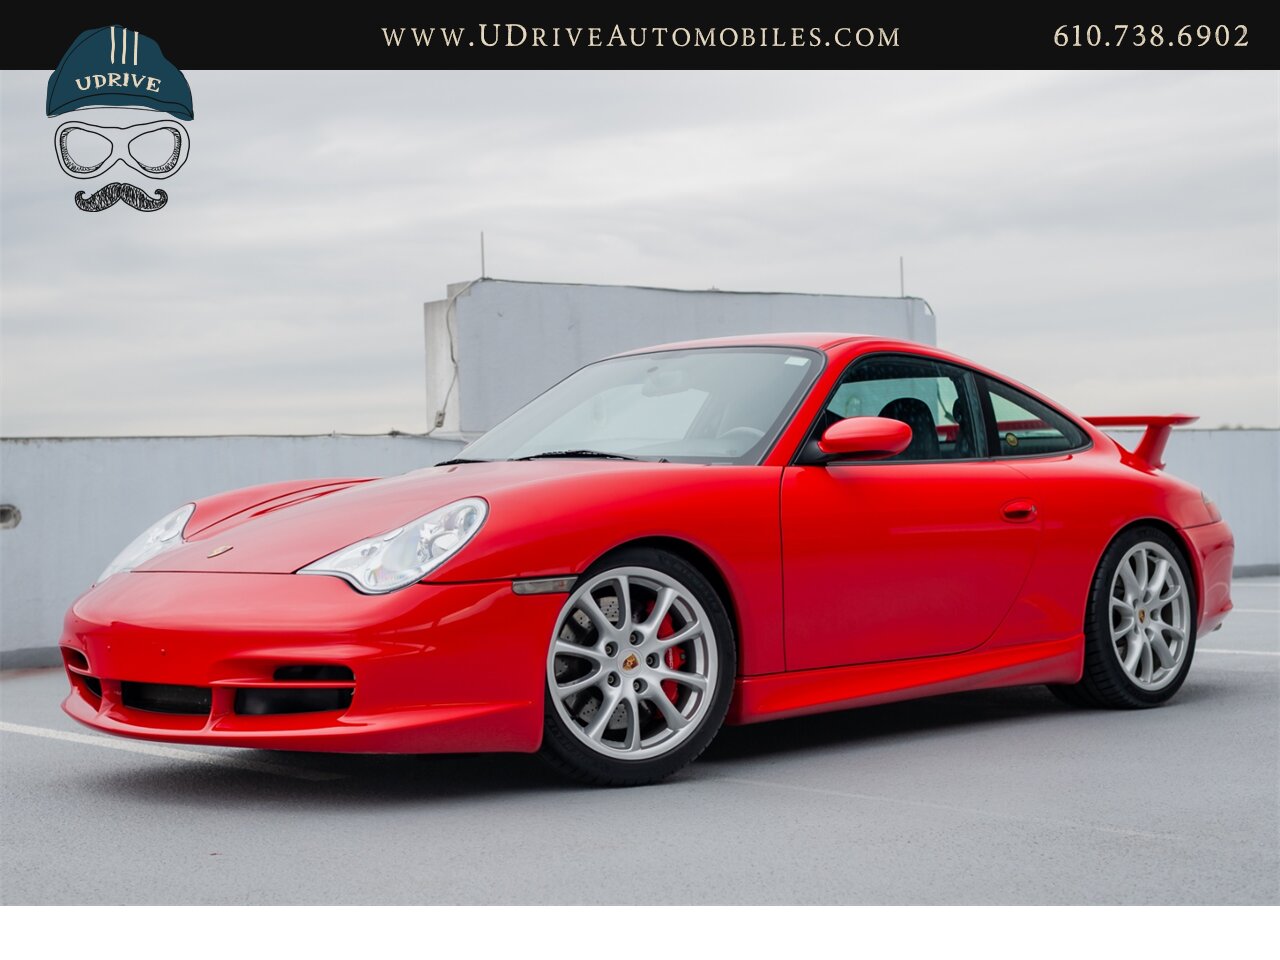 2004 Porsche 911 996 GT3 Guards Red Sport Seats Painted Hardbacks  Painted Center Console 18k Miles - Photo 1 - West Chester, PA 19382